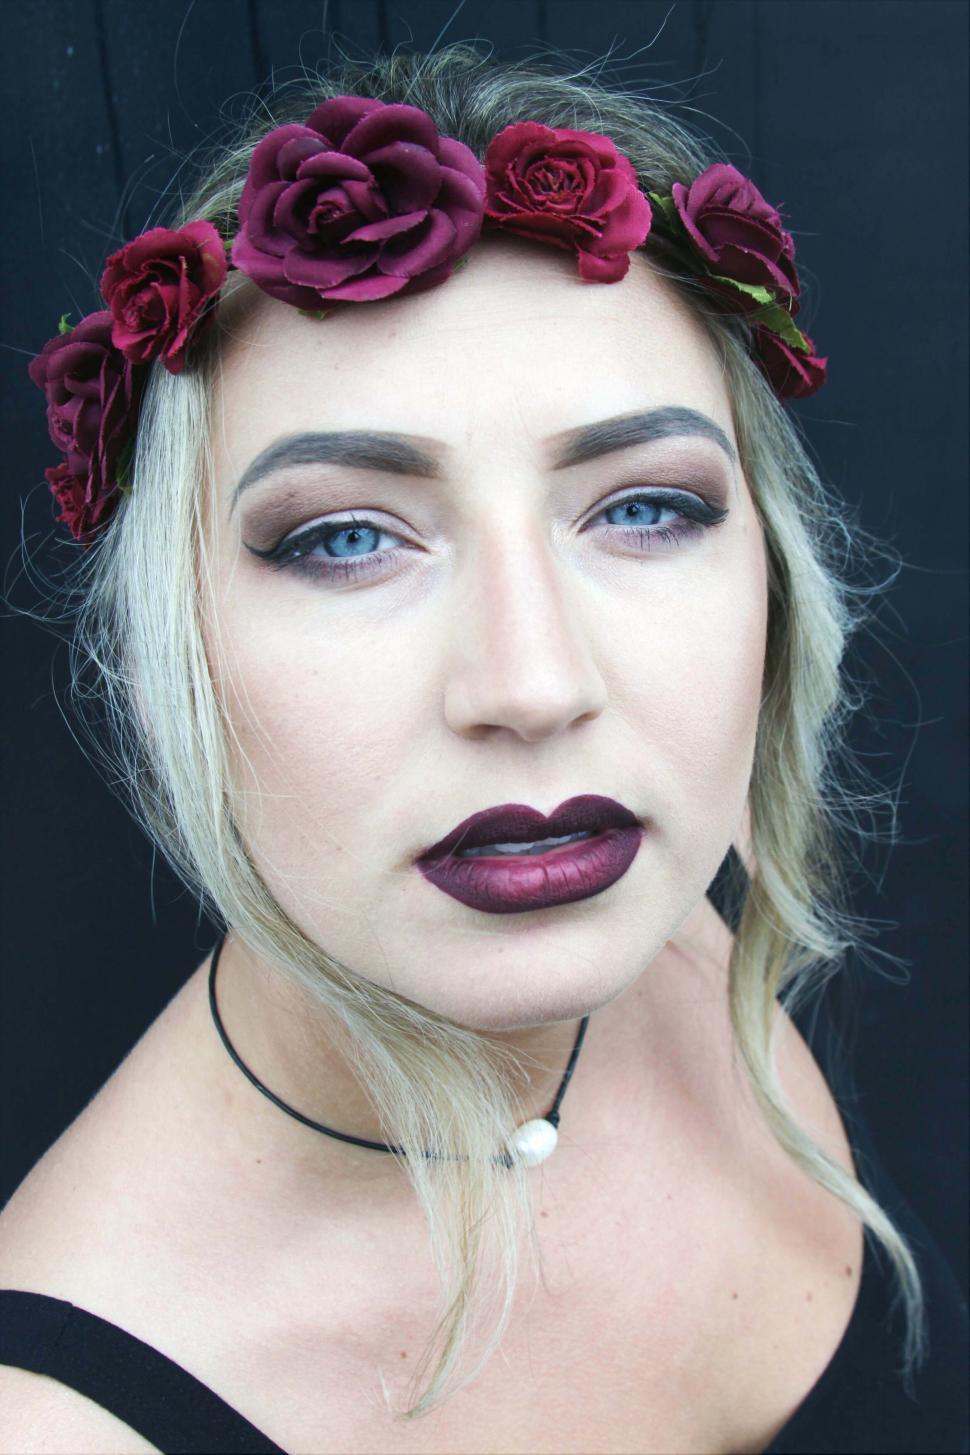 Free Image of Portrait with floral headpiece and makeup 